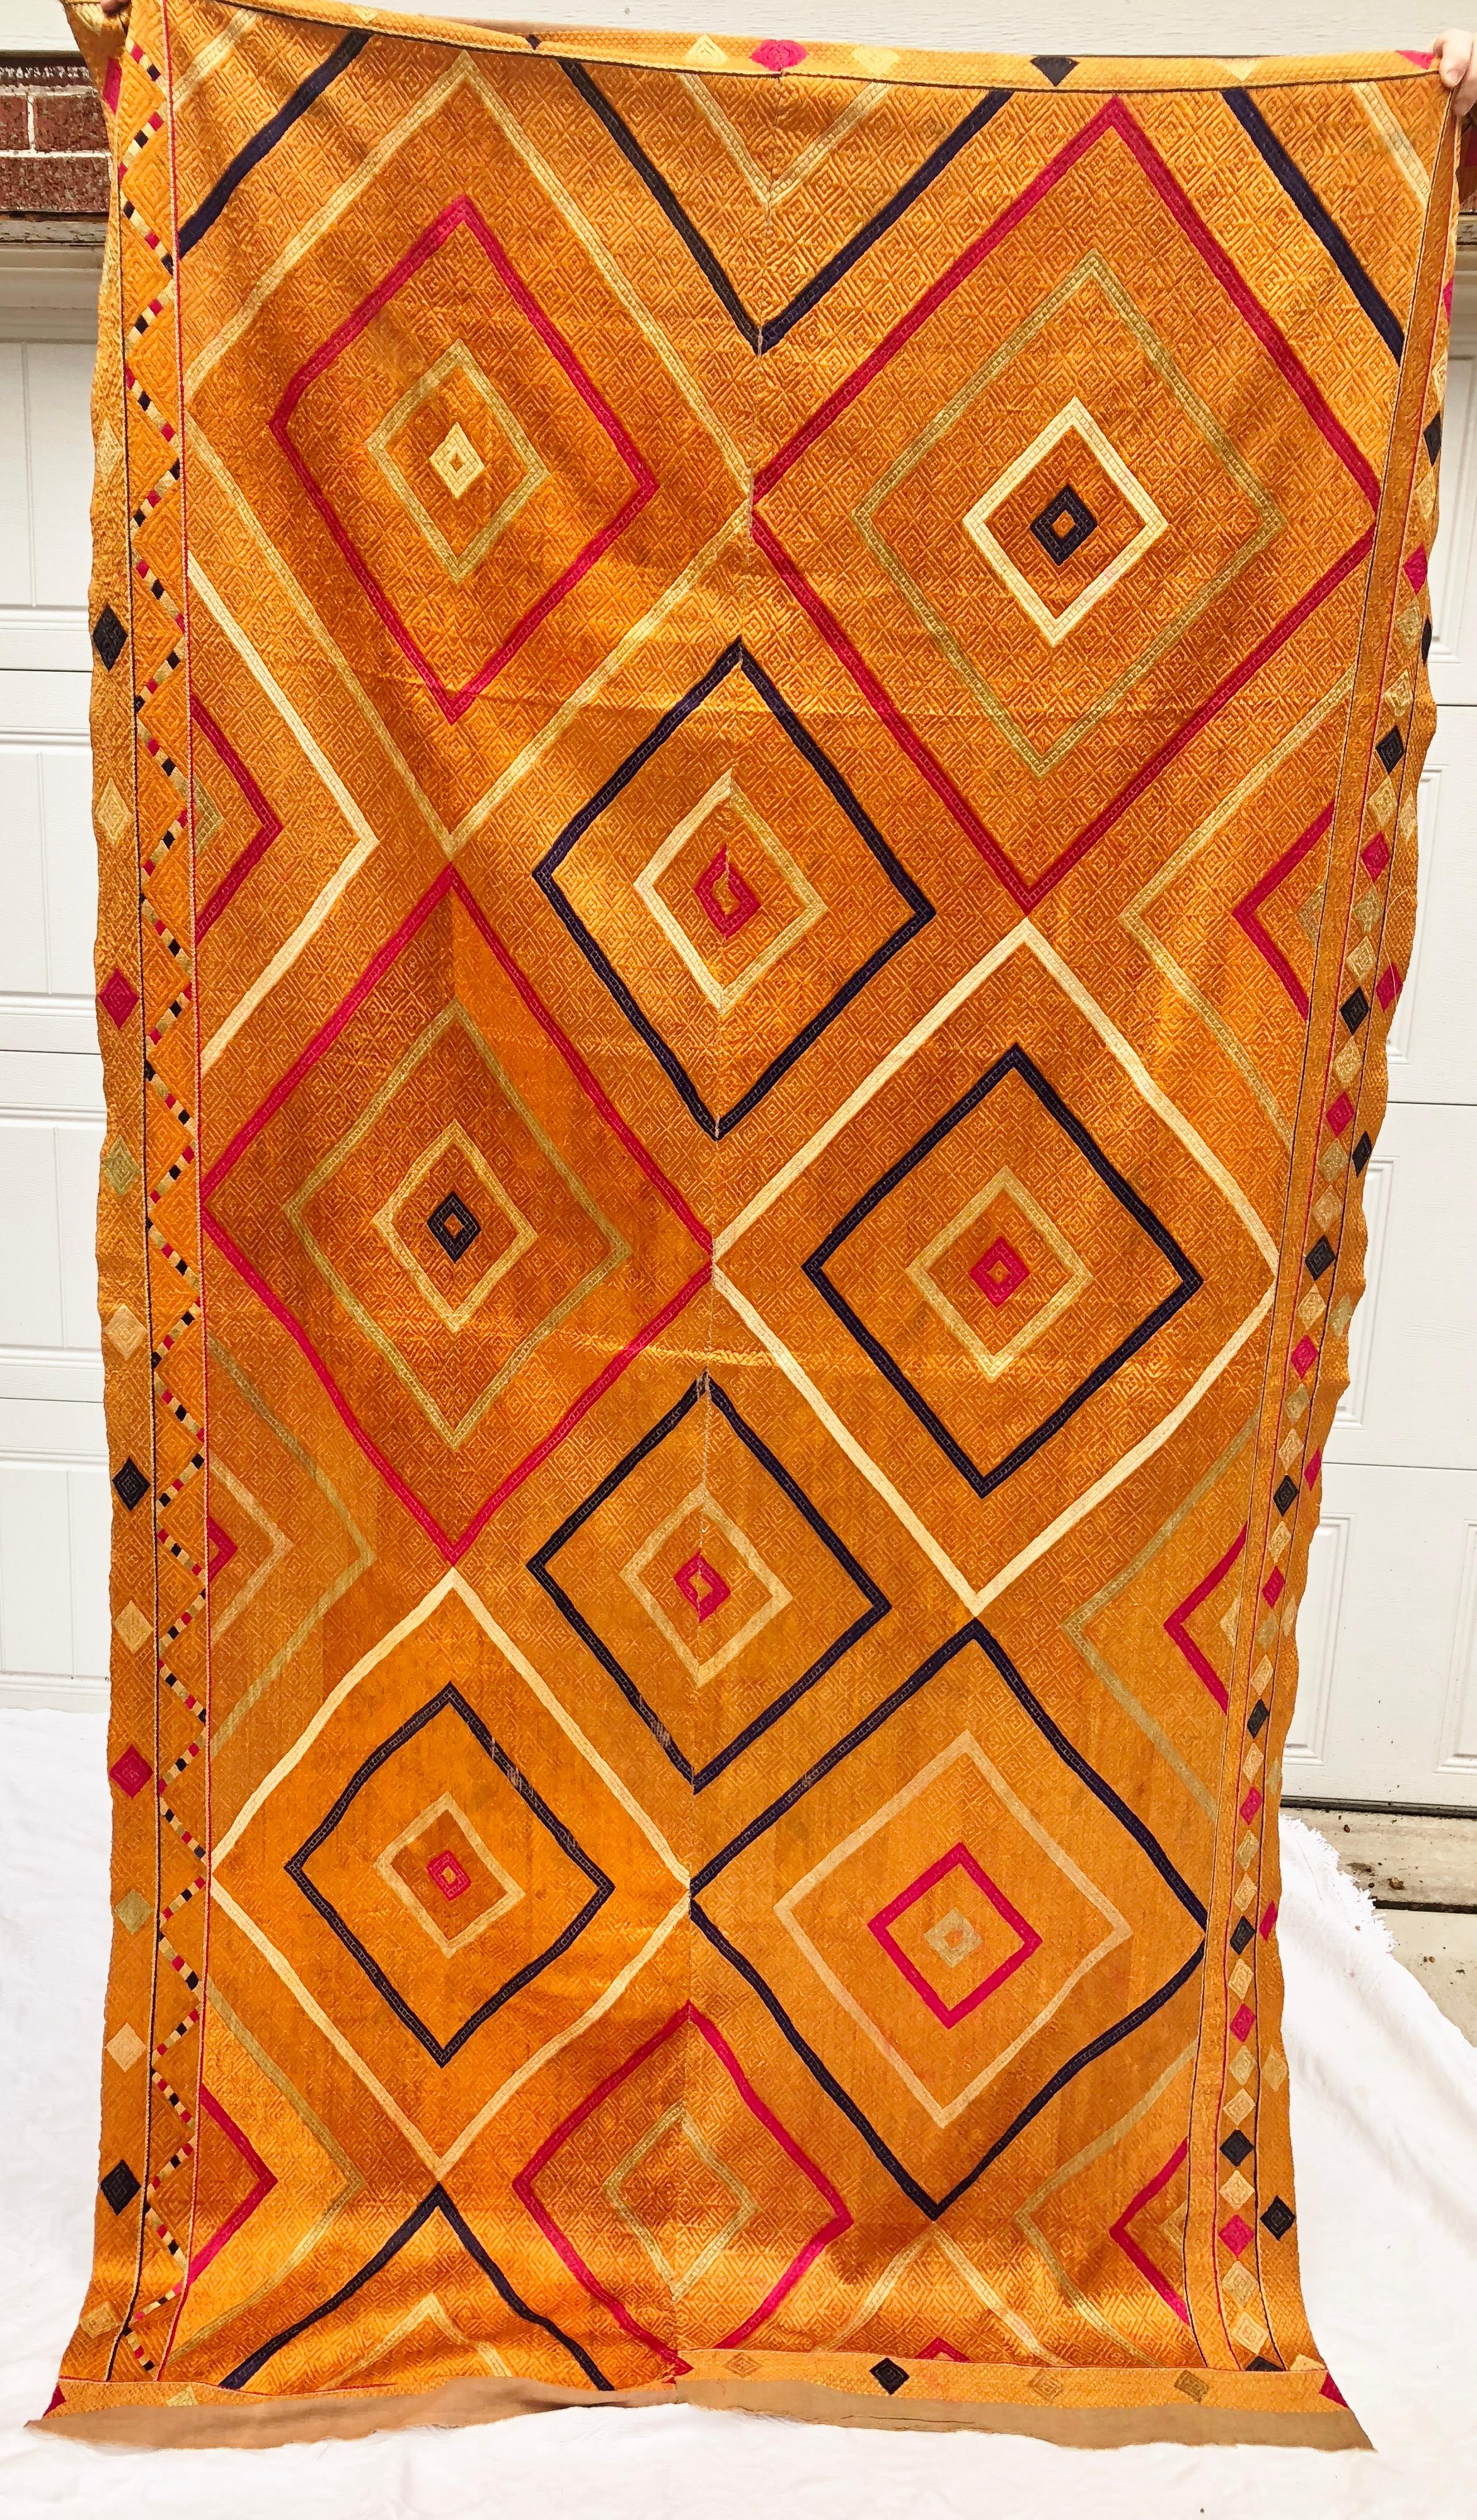 Vintage phulkari bagh wedding shawl from Punjab, India. The cotton hand loomed khadi cloth is hand embroidered with vibrant silk threads by members of the young girl's family for her wedding. Shawl is in very good condition for it's age. This is a